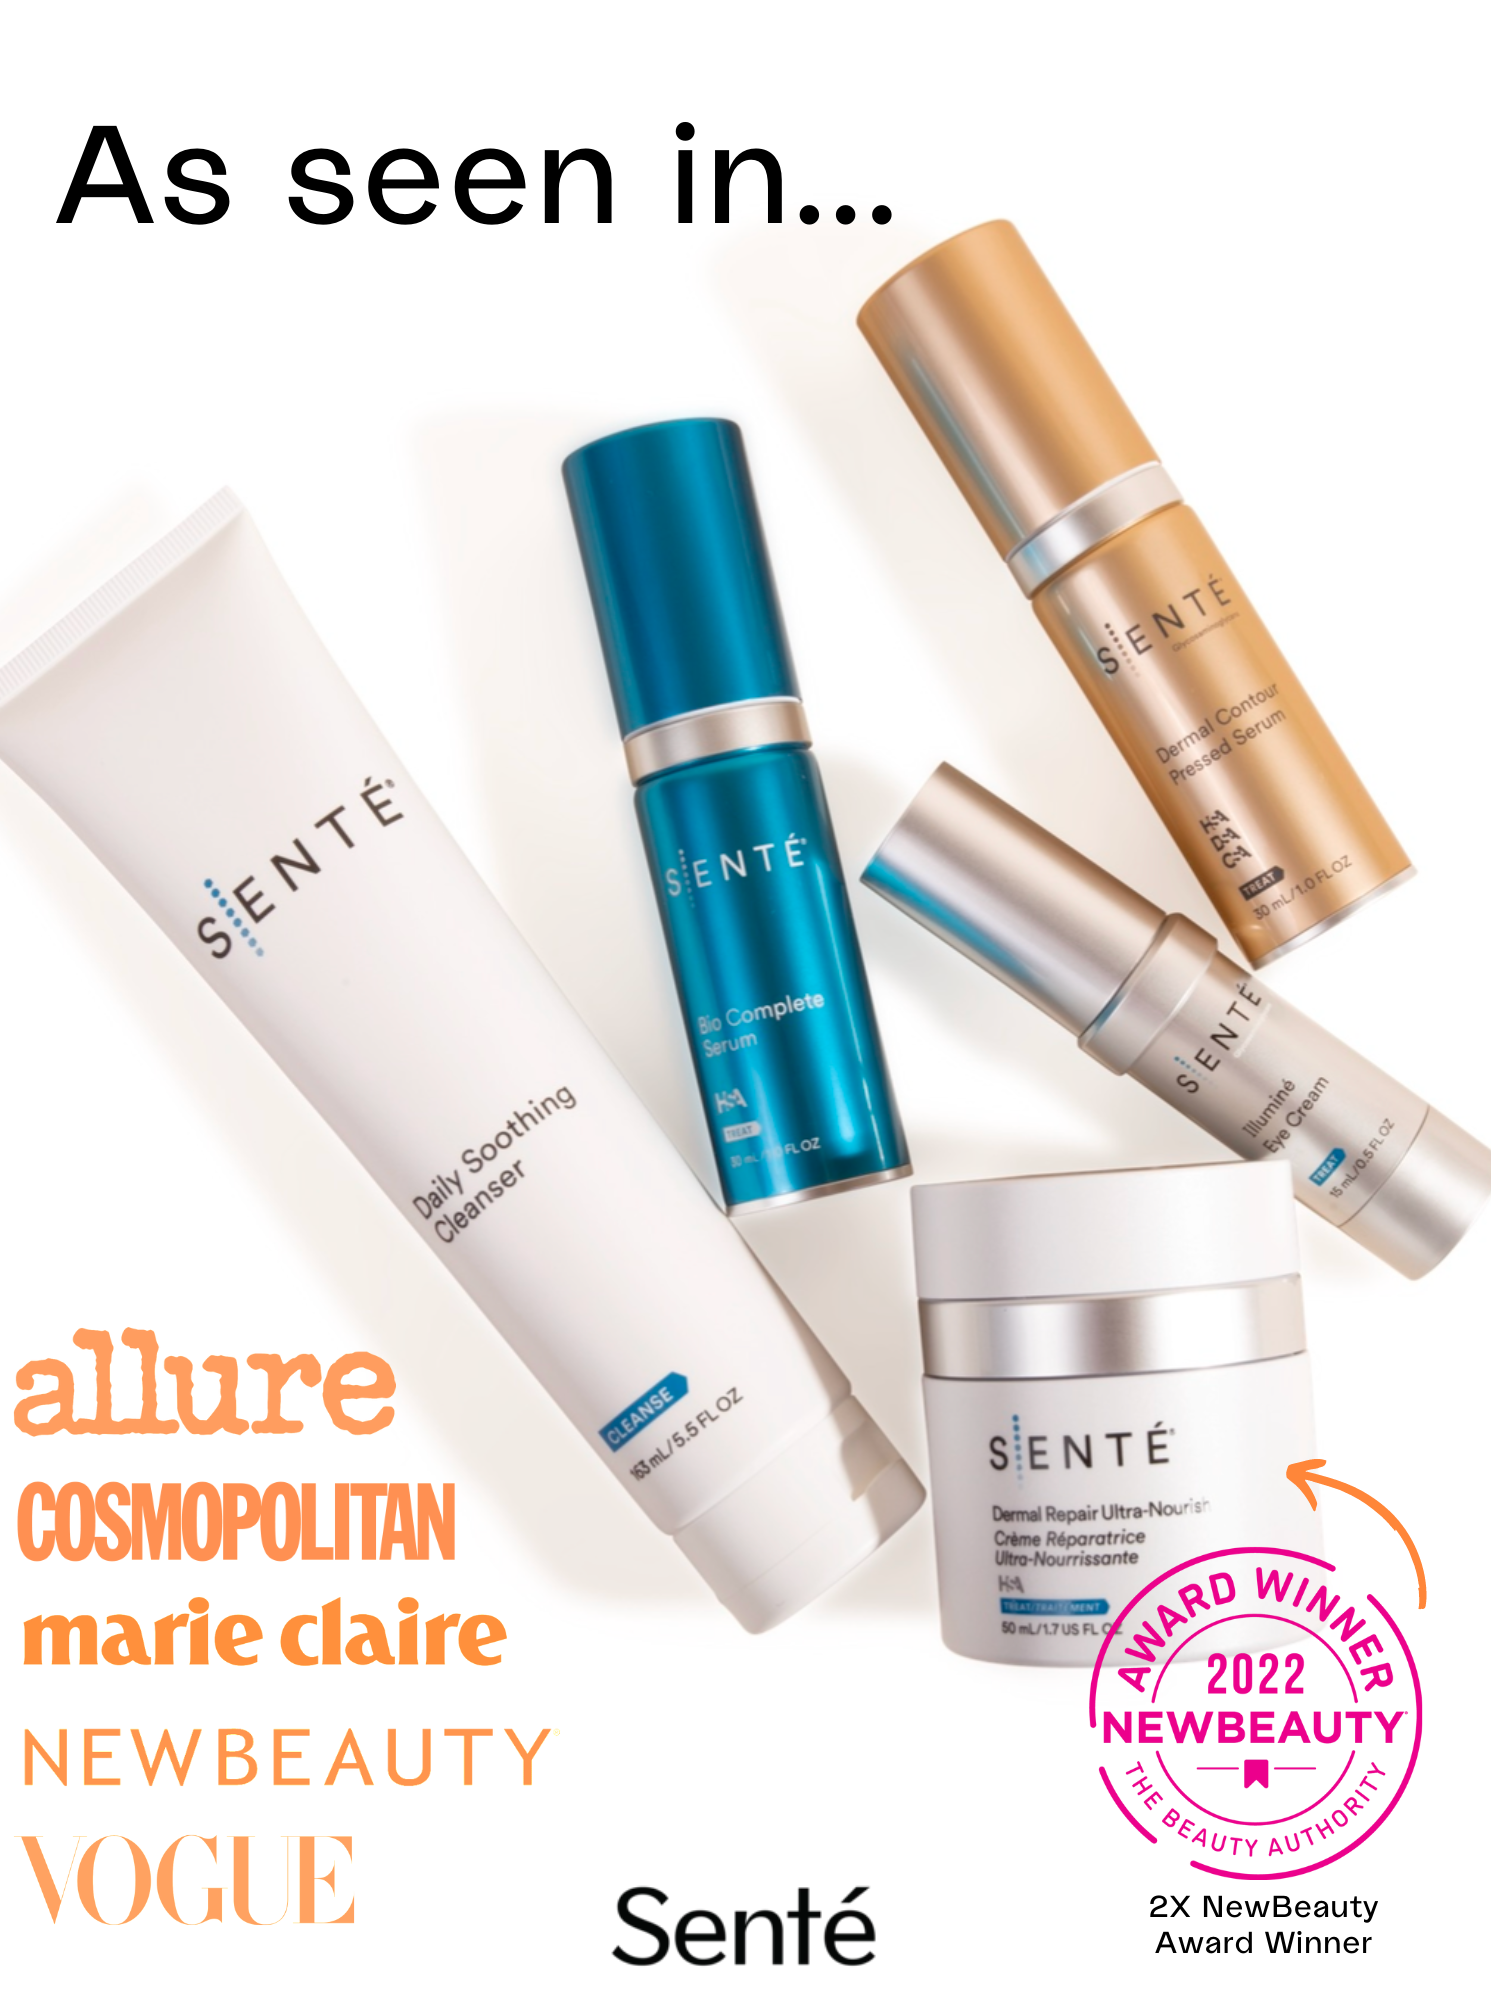 Sente skincare products promotion